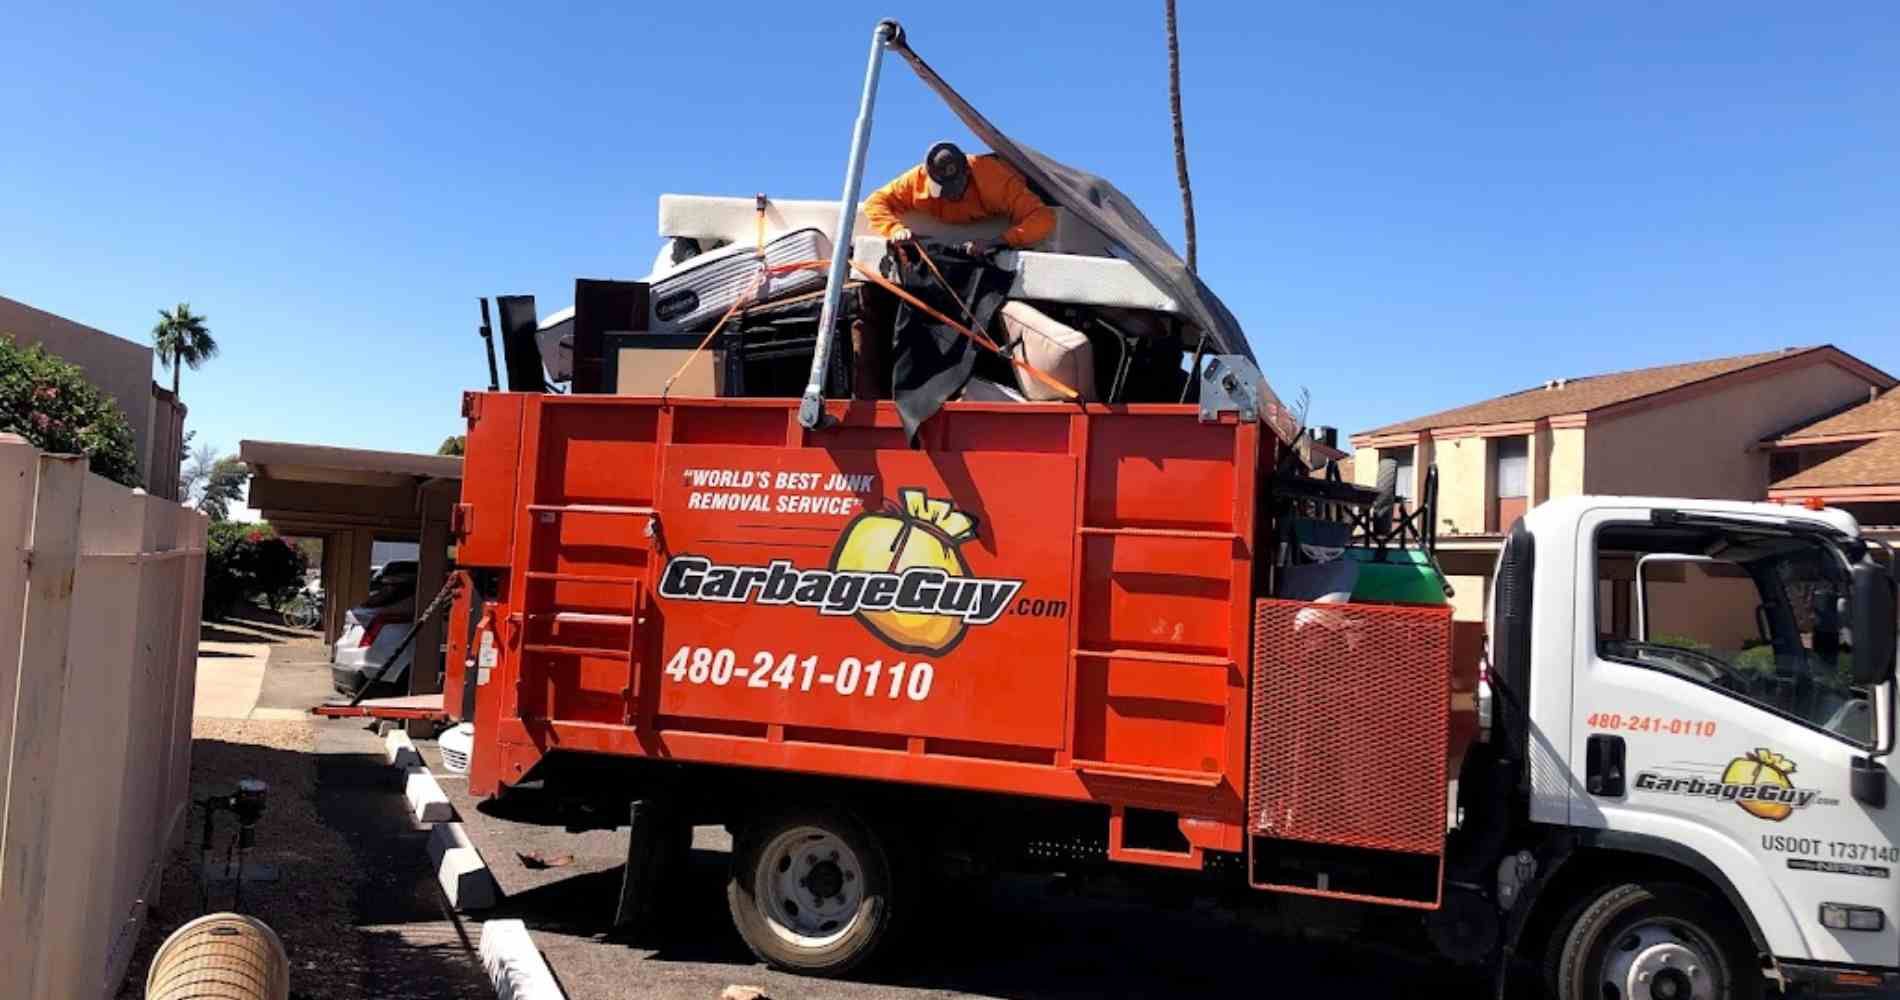 #1 for Furniture Removal in Glendale, AZ With Over 1200 5-Star Reviews!